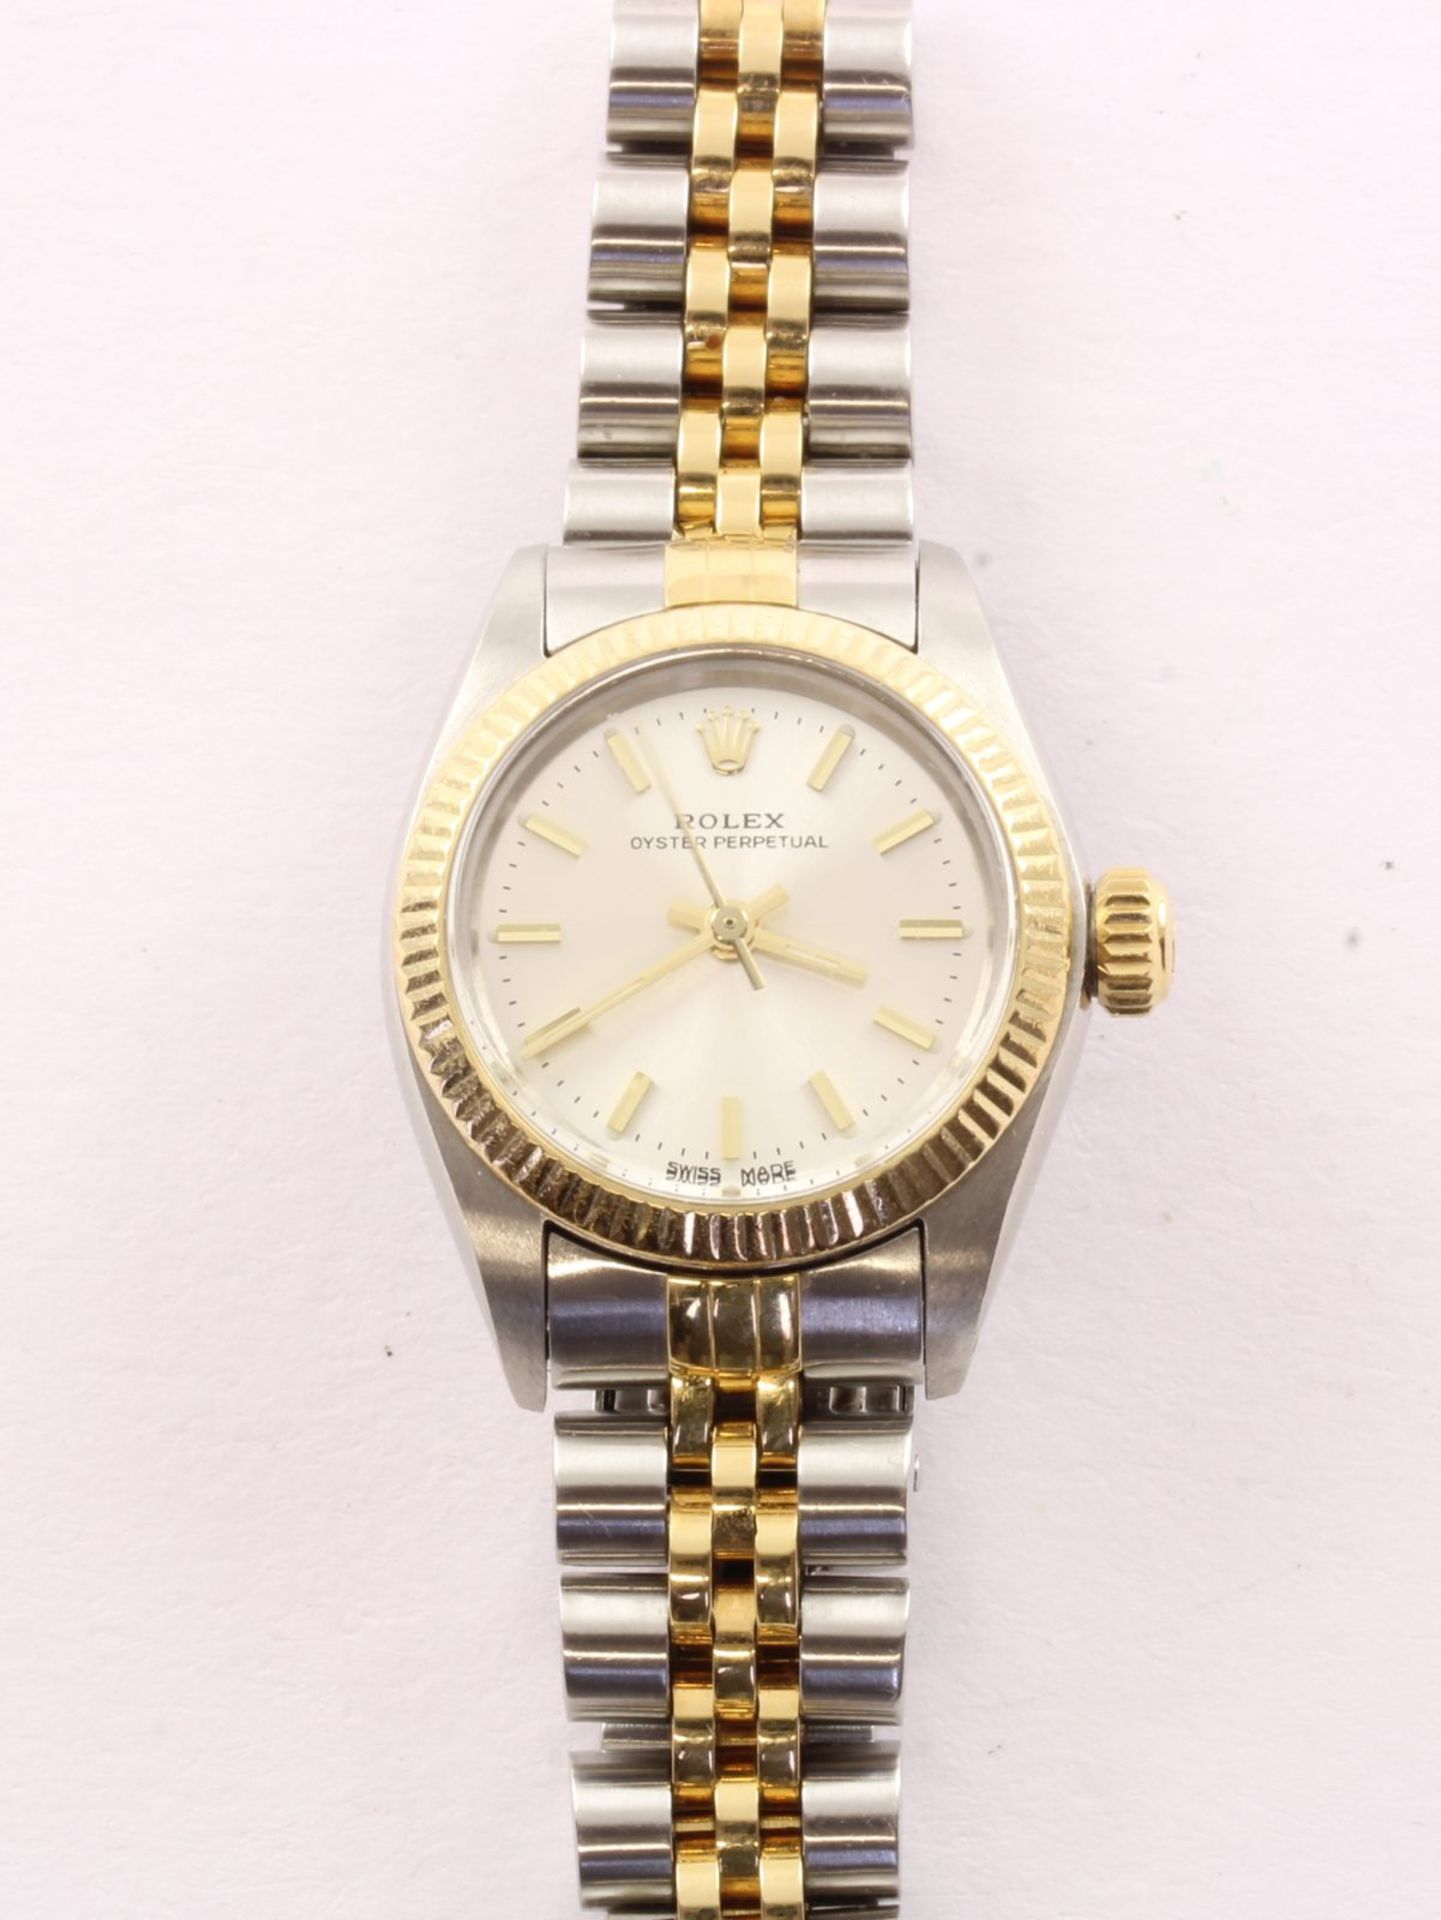 Armbanduhr, Marke: ROLEX, "Oyster Perpetual", Stahl